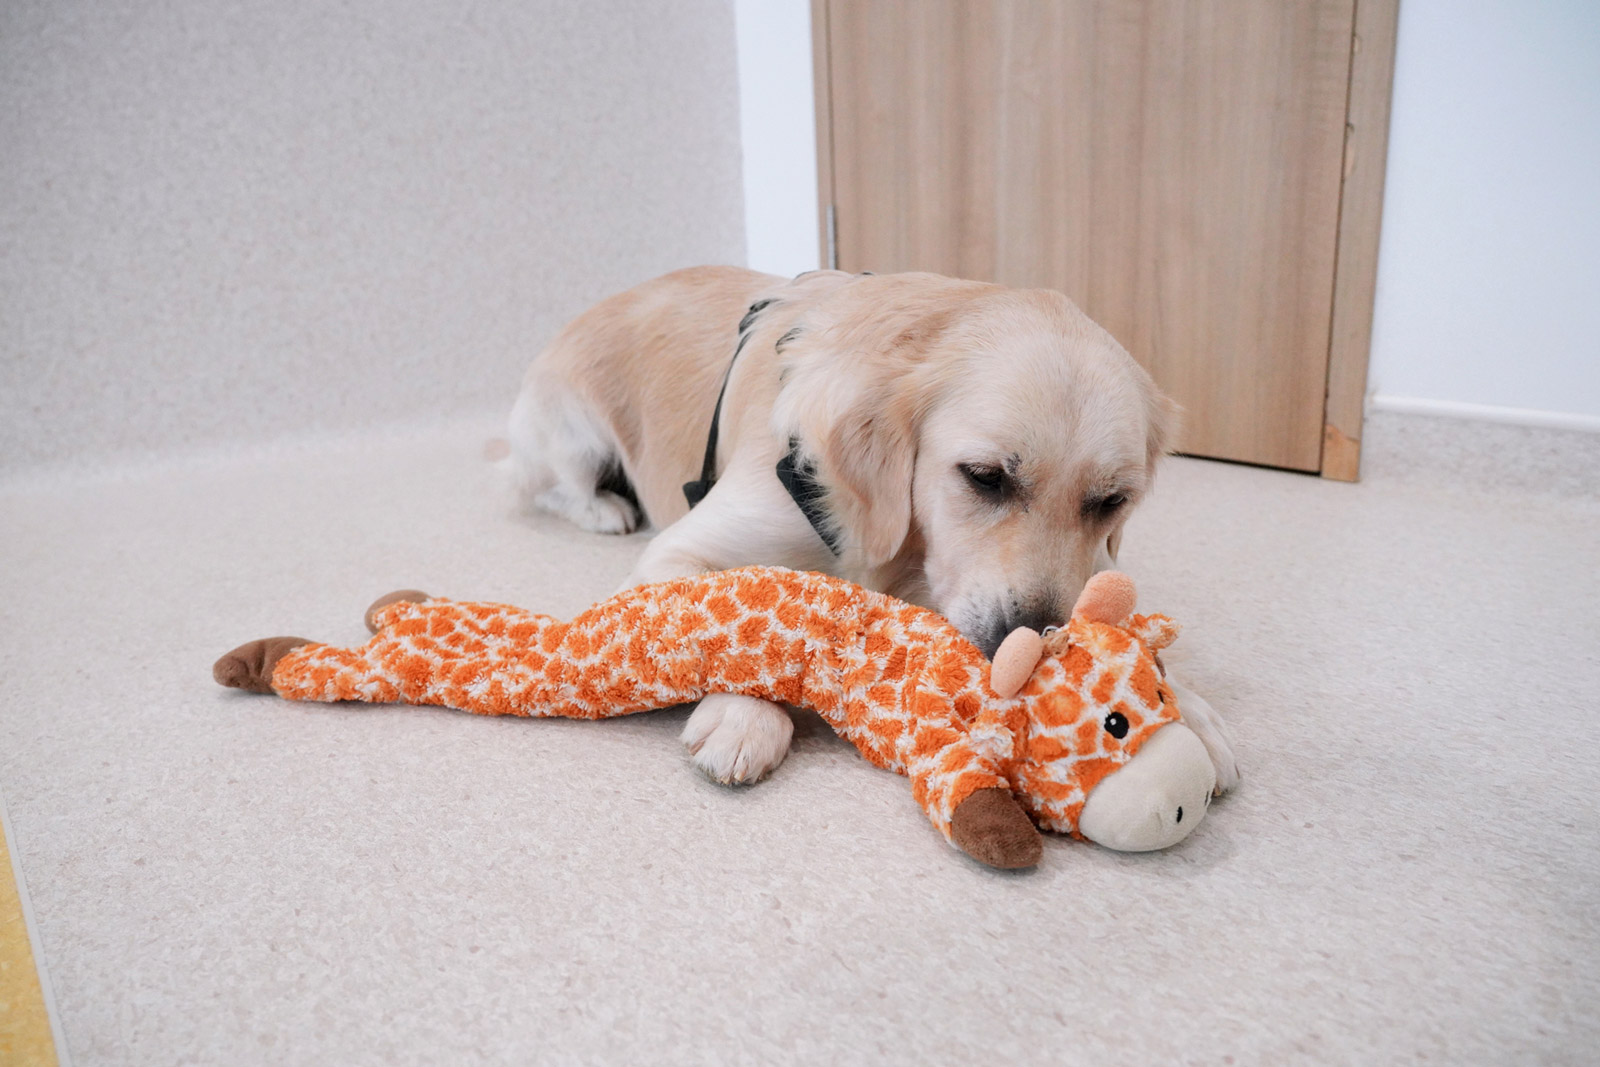 A Golden Retriever playing calmly with a toy.